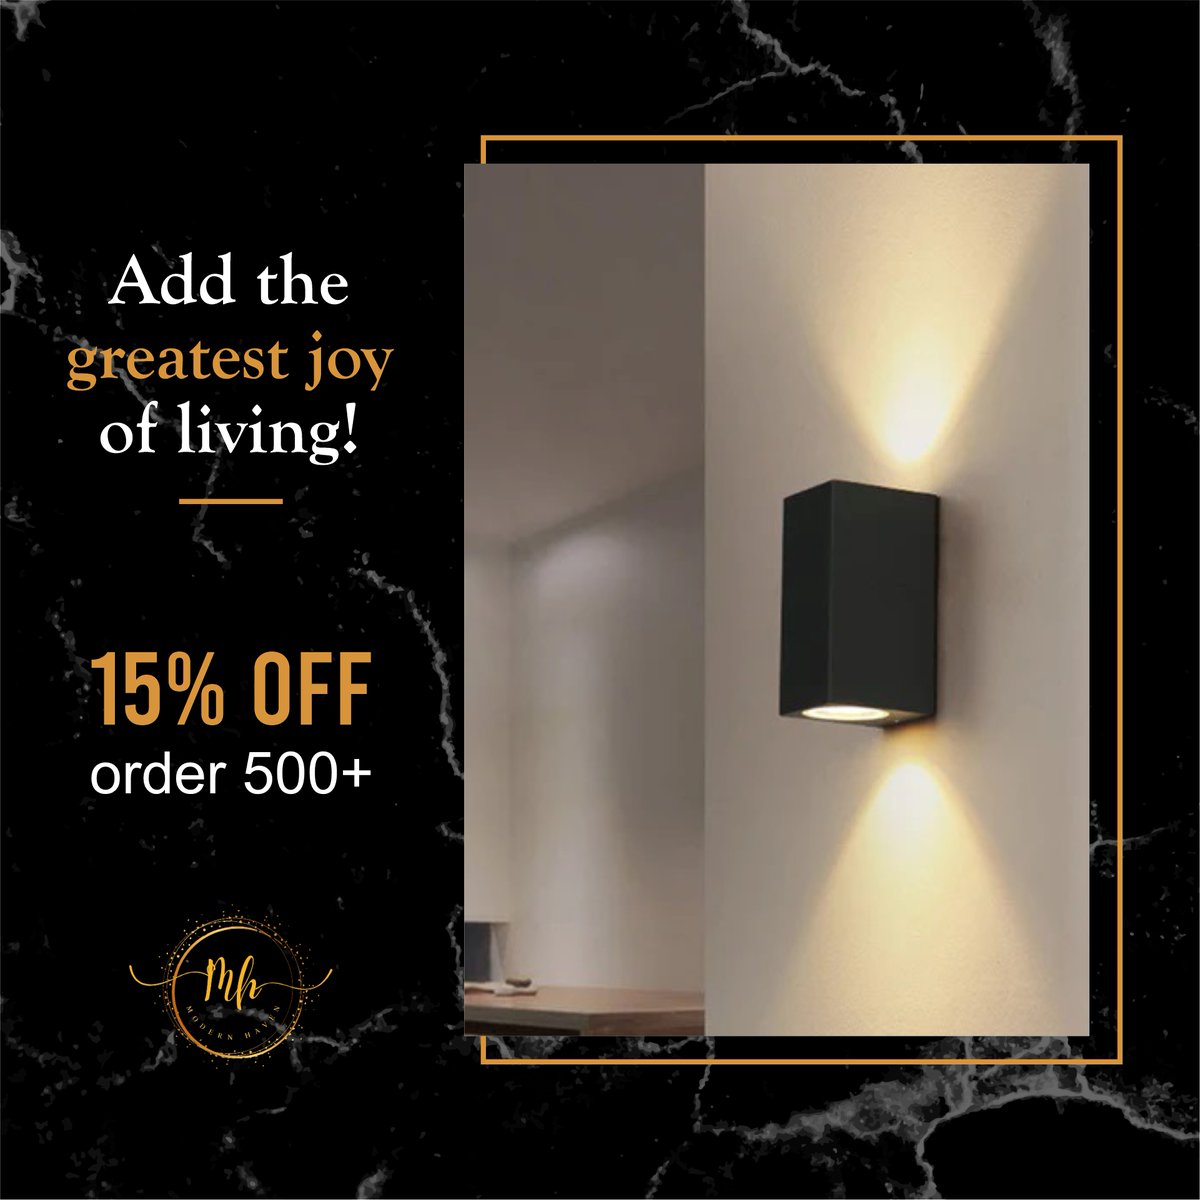 This wall lamp features a sleek and modern design with a black aluminum lamp body and a glass covering. It uses an LED light source and has a power output of 12W. 
🛍️ bit.ly/3qkk85I

#modernhavenn #homedecor #interiordesign #ModernLighting #SleekDesign #WallLamp